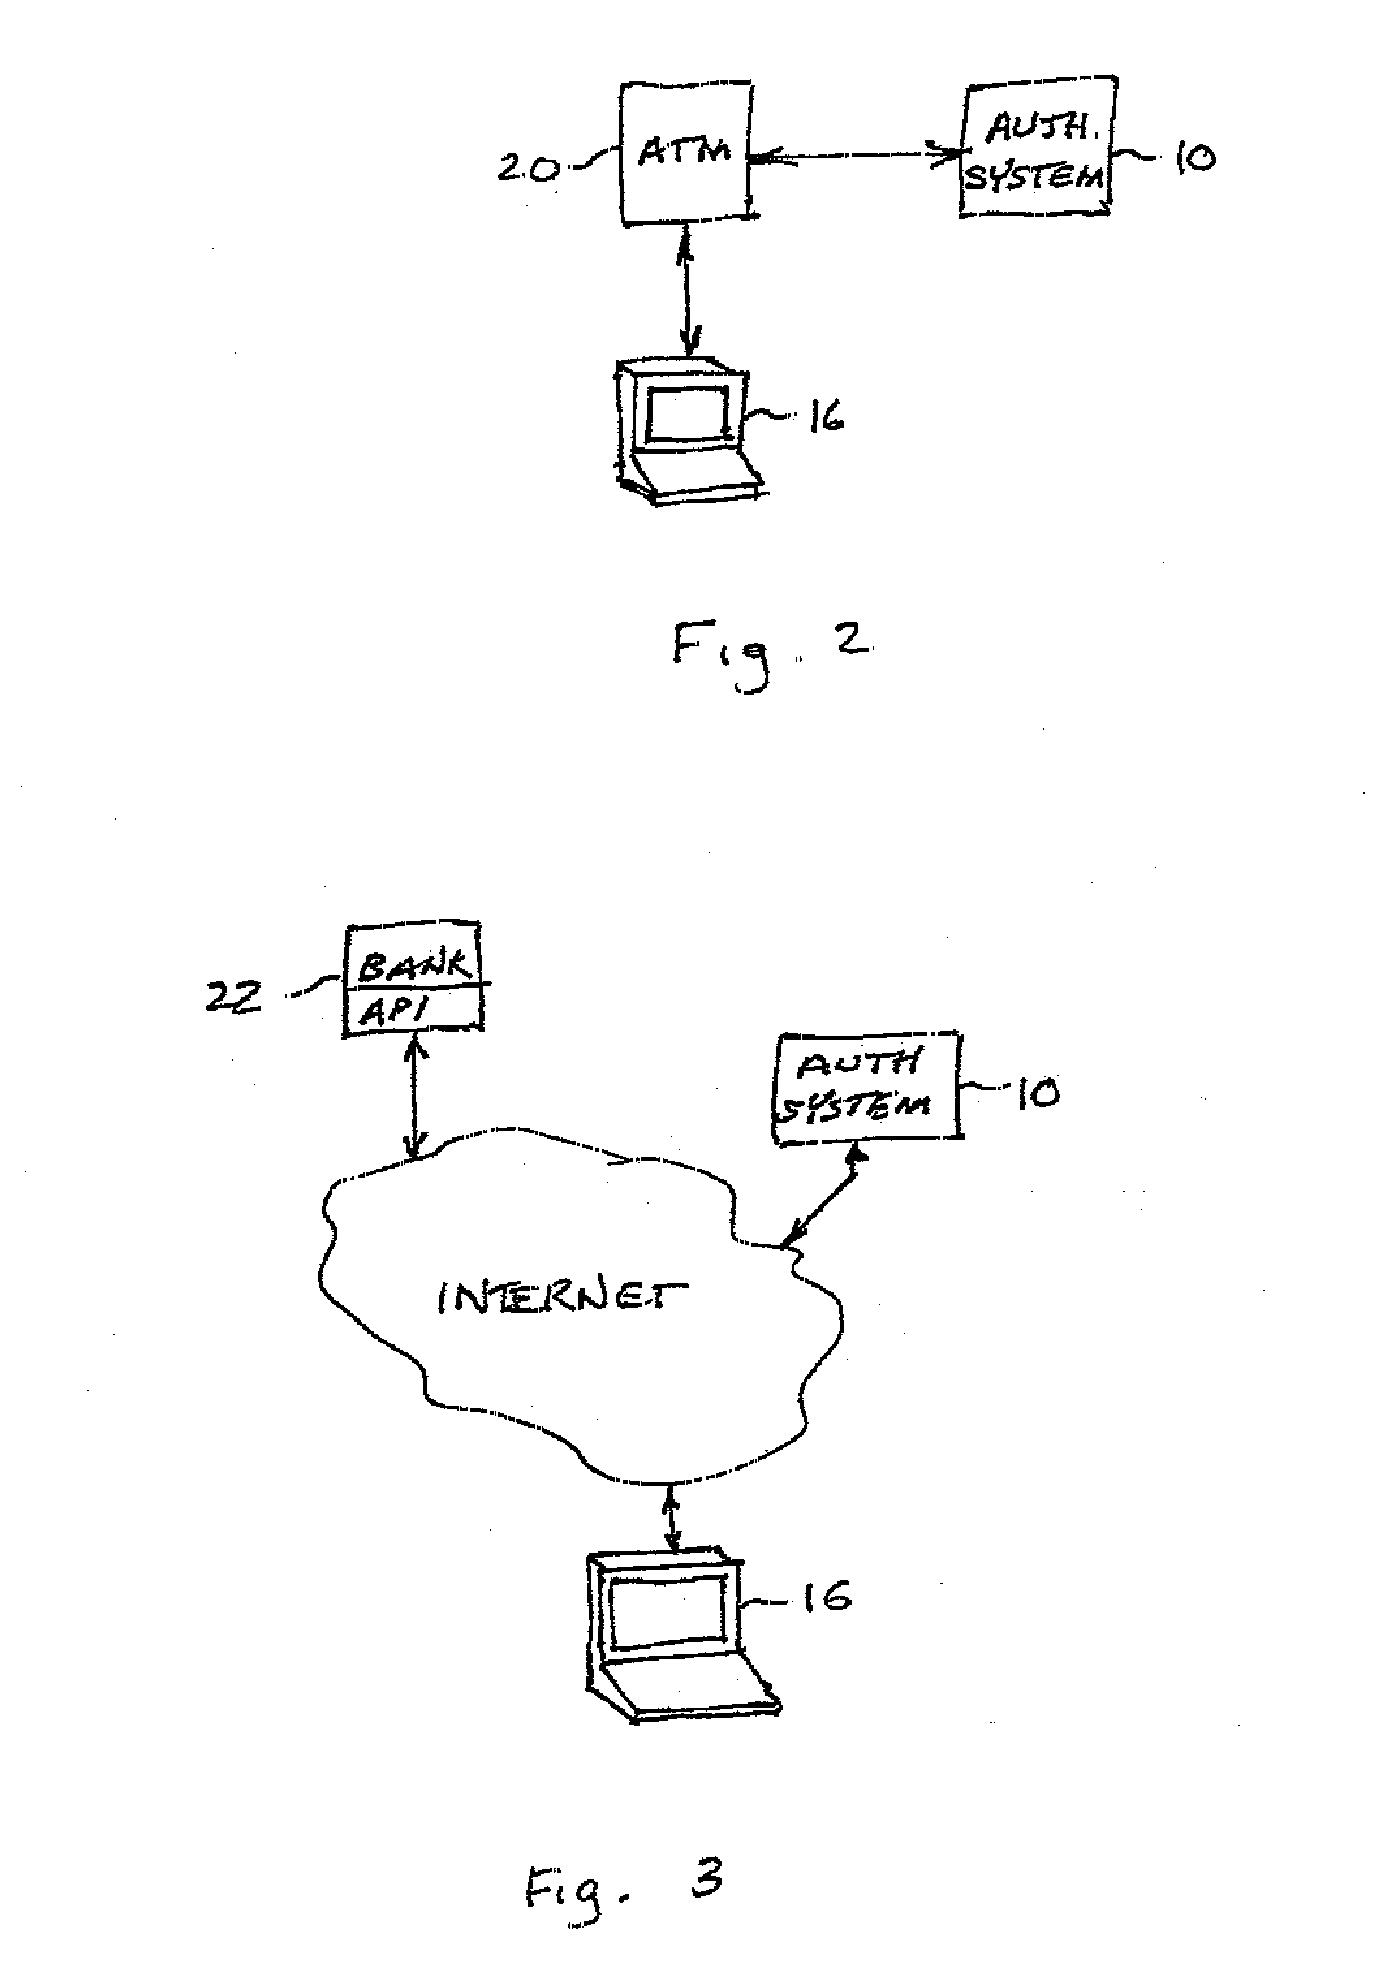 Memory based authentication system